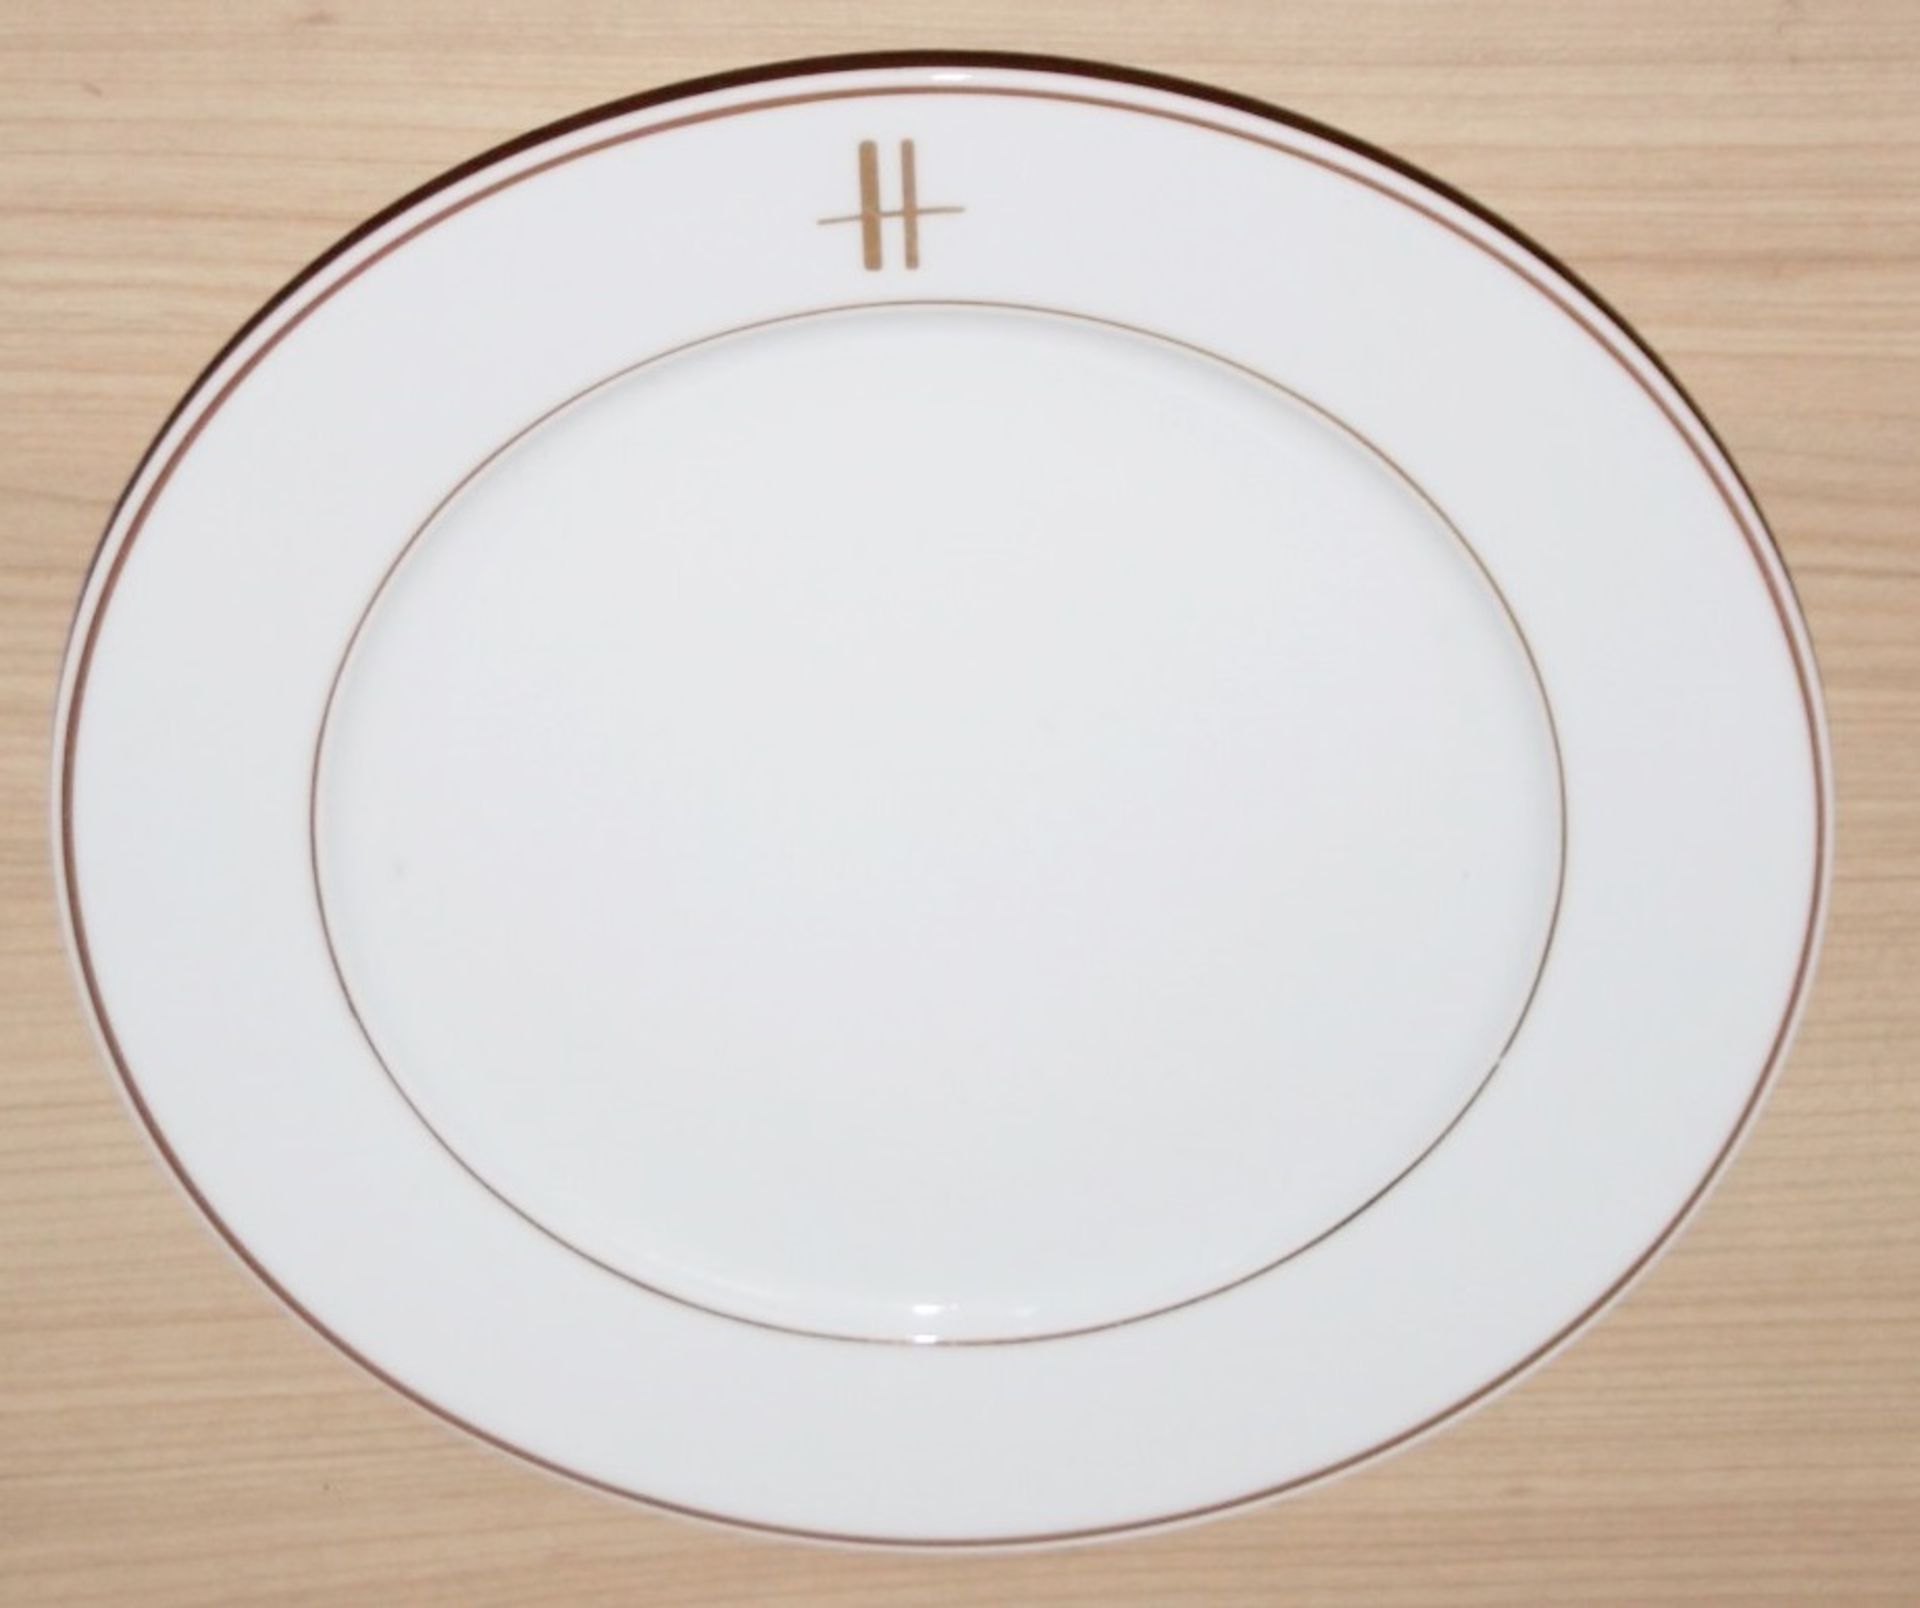 15 x PILLIVUYT Porcelain 30.4cm Large Dinner Charger Plates Featuring 'Famous Branding' In Gold - Image 3 of 5